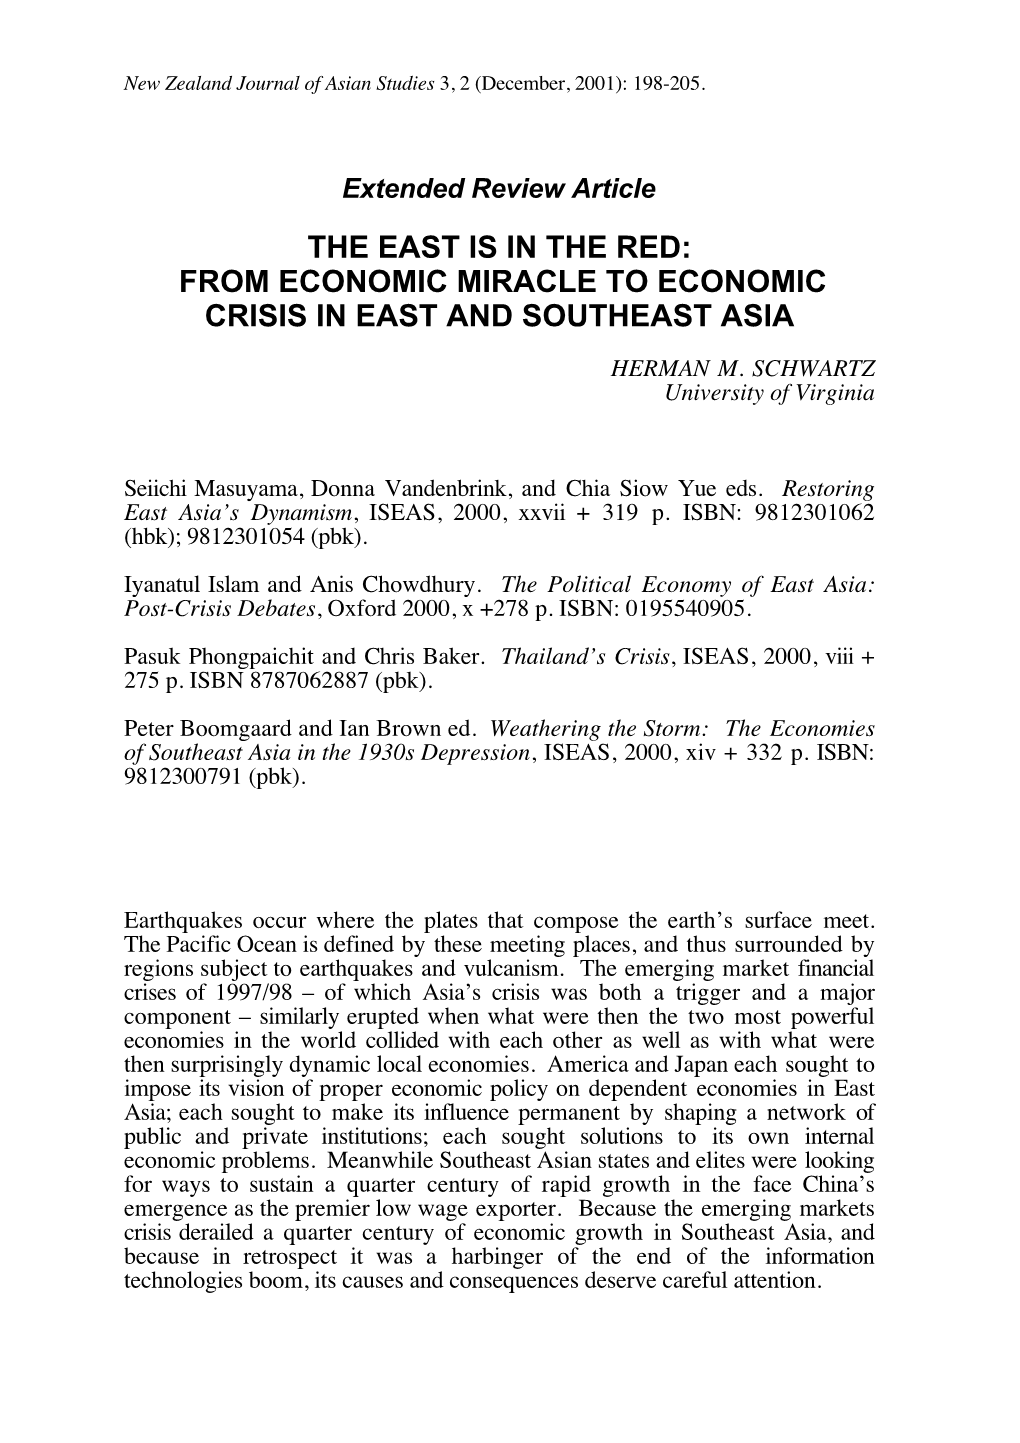 The East Is in the Red: from Economic Miracle to Economic Crisis in East and Southeast Asia